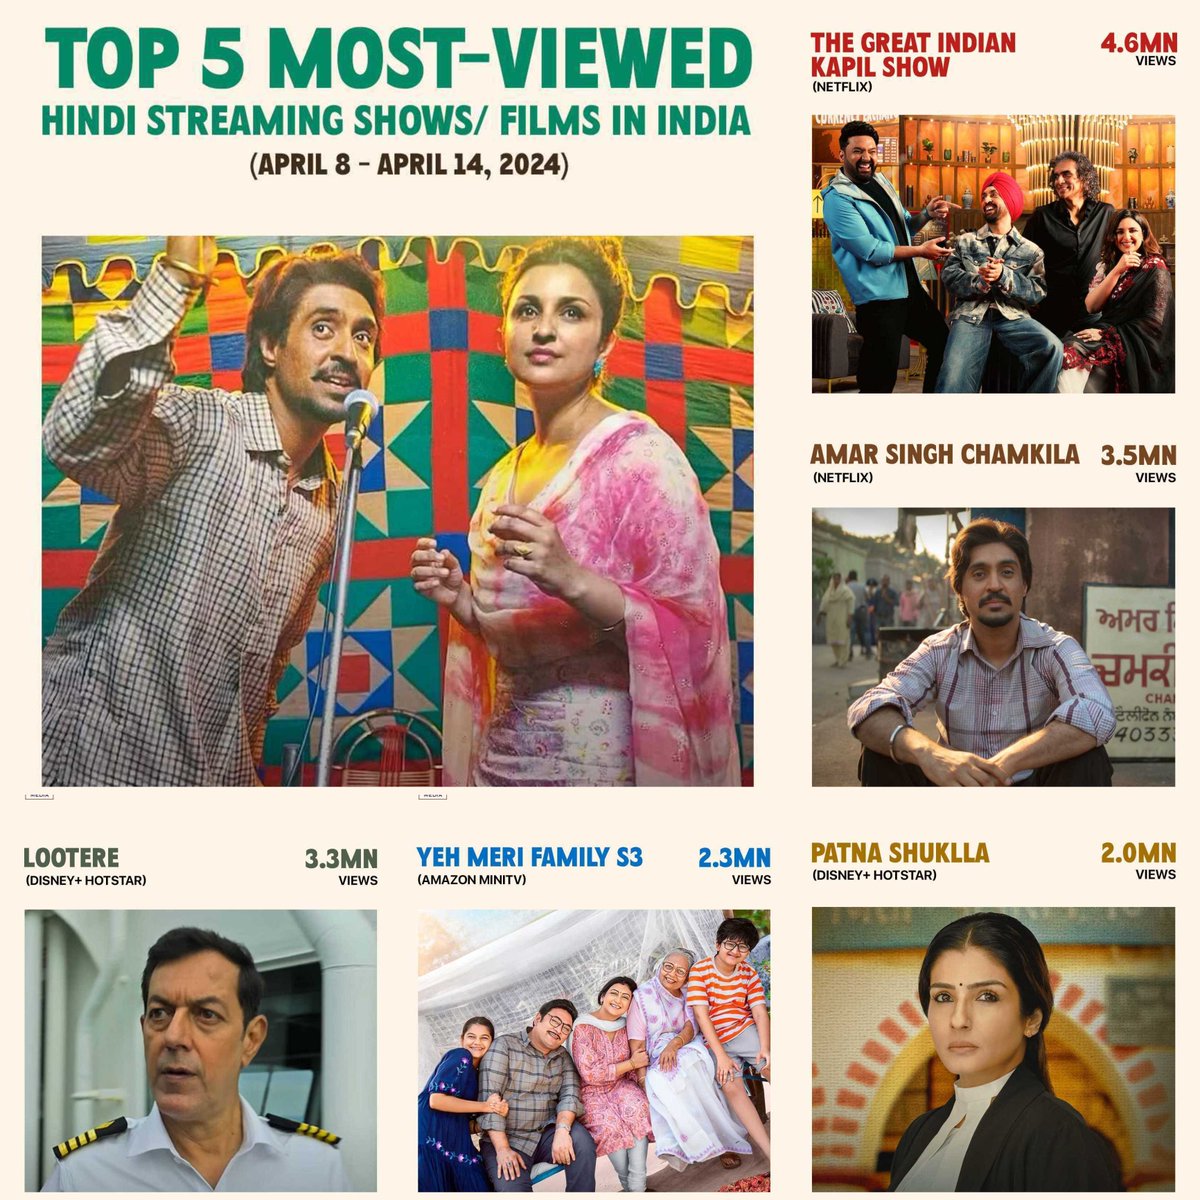 From 'The Great Indian Kapil Show' to 'Yeh Meri Family S3', here's a list of the most-viewed shows and movies from the Indian streaming space of last week. In collaboration with @OrmaxMedia. #FilmCompanion